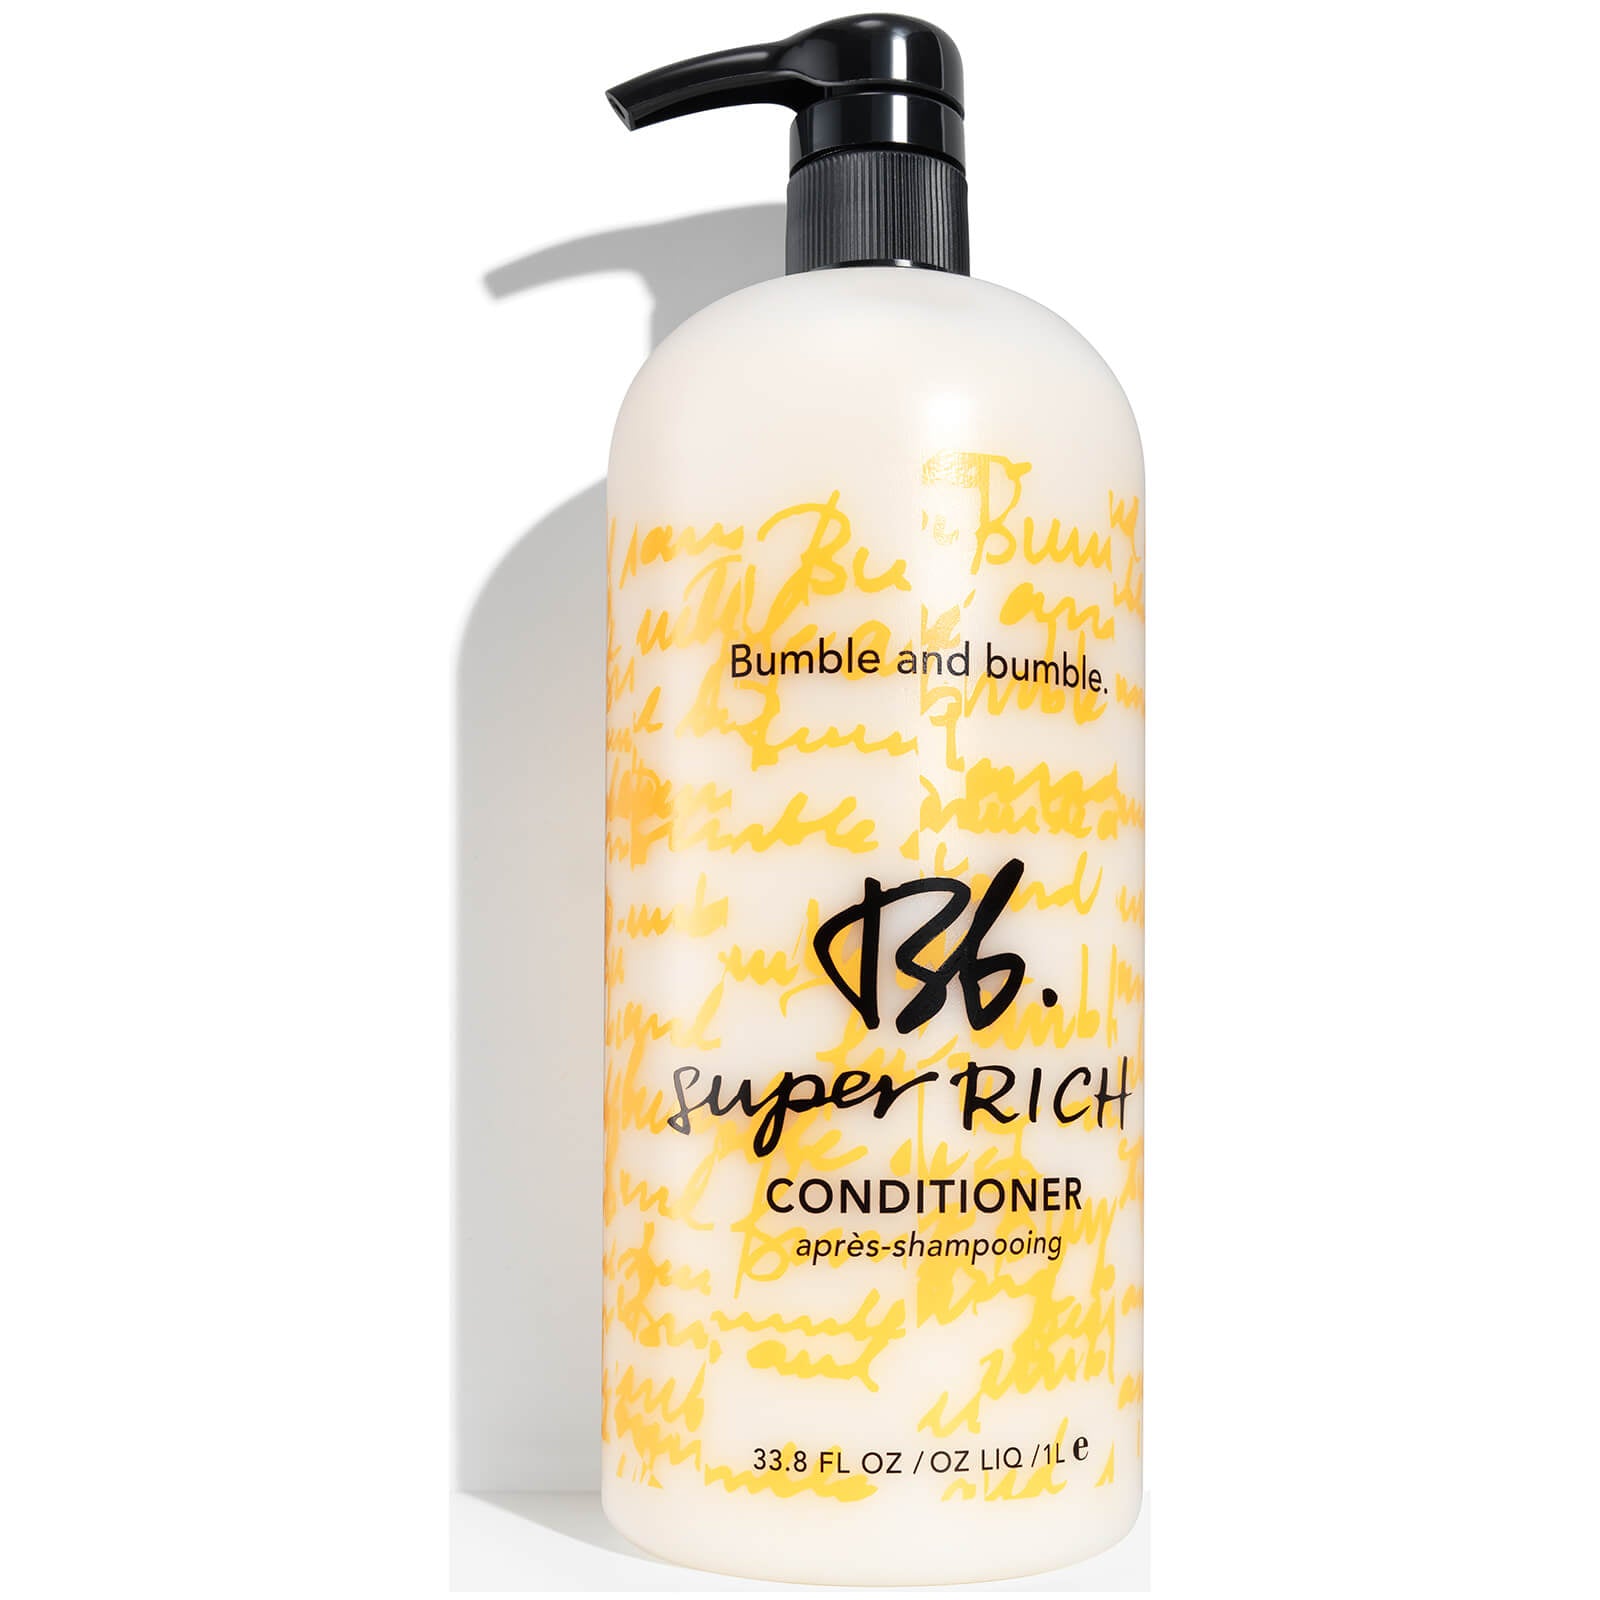 Bumble and bumble Super Rich Conditioner Liters